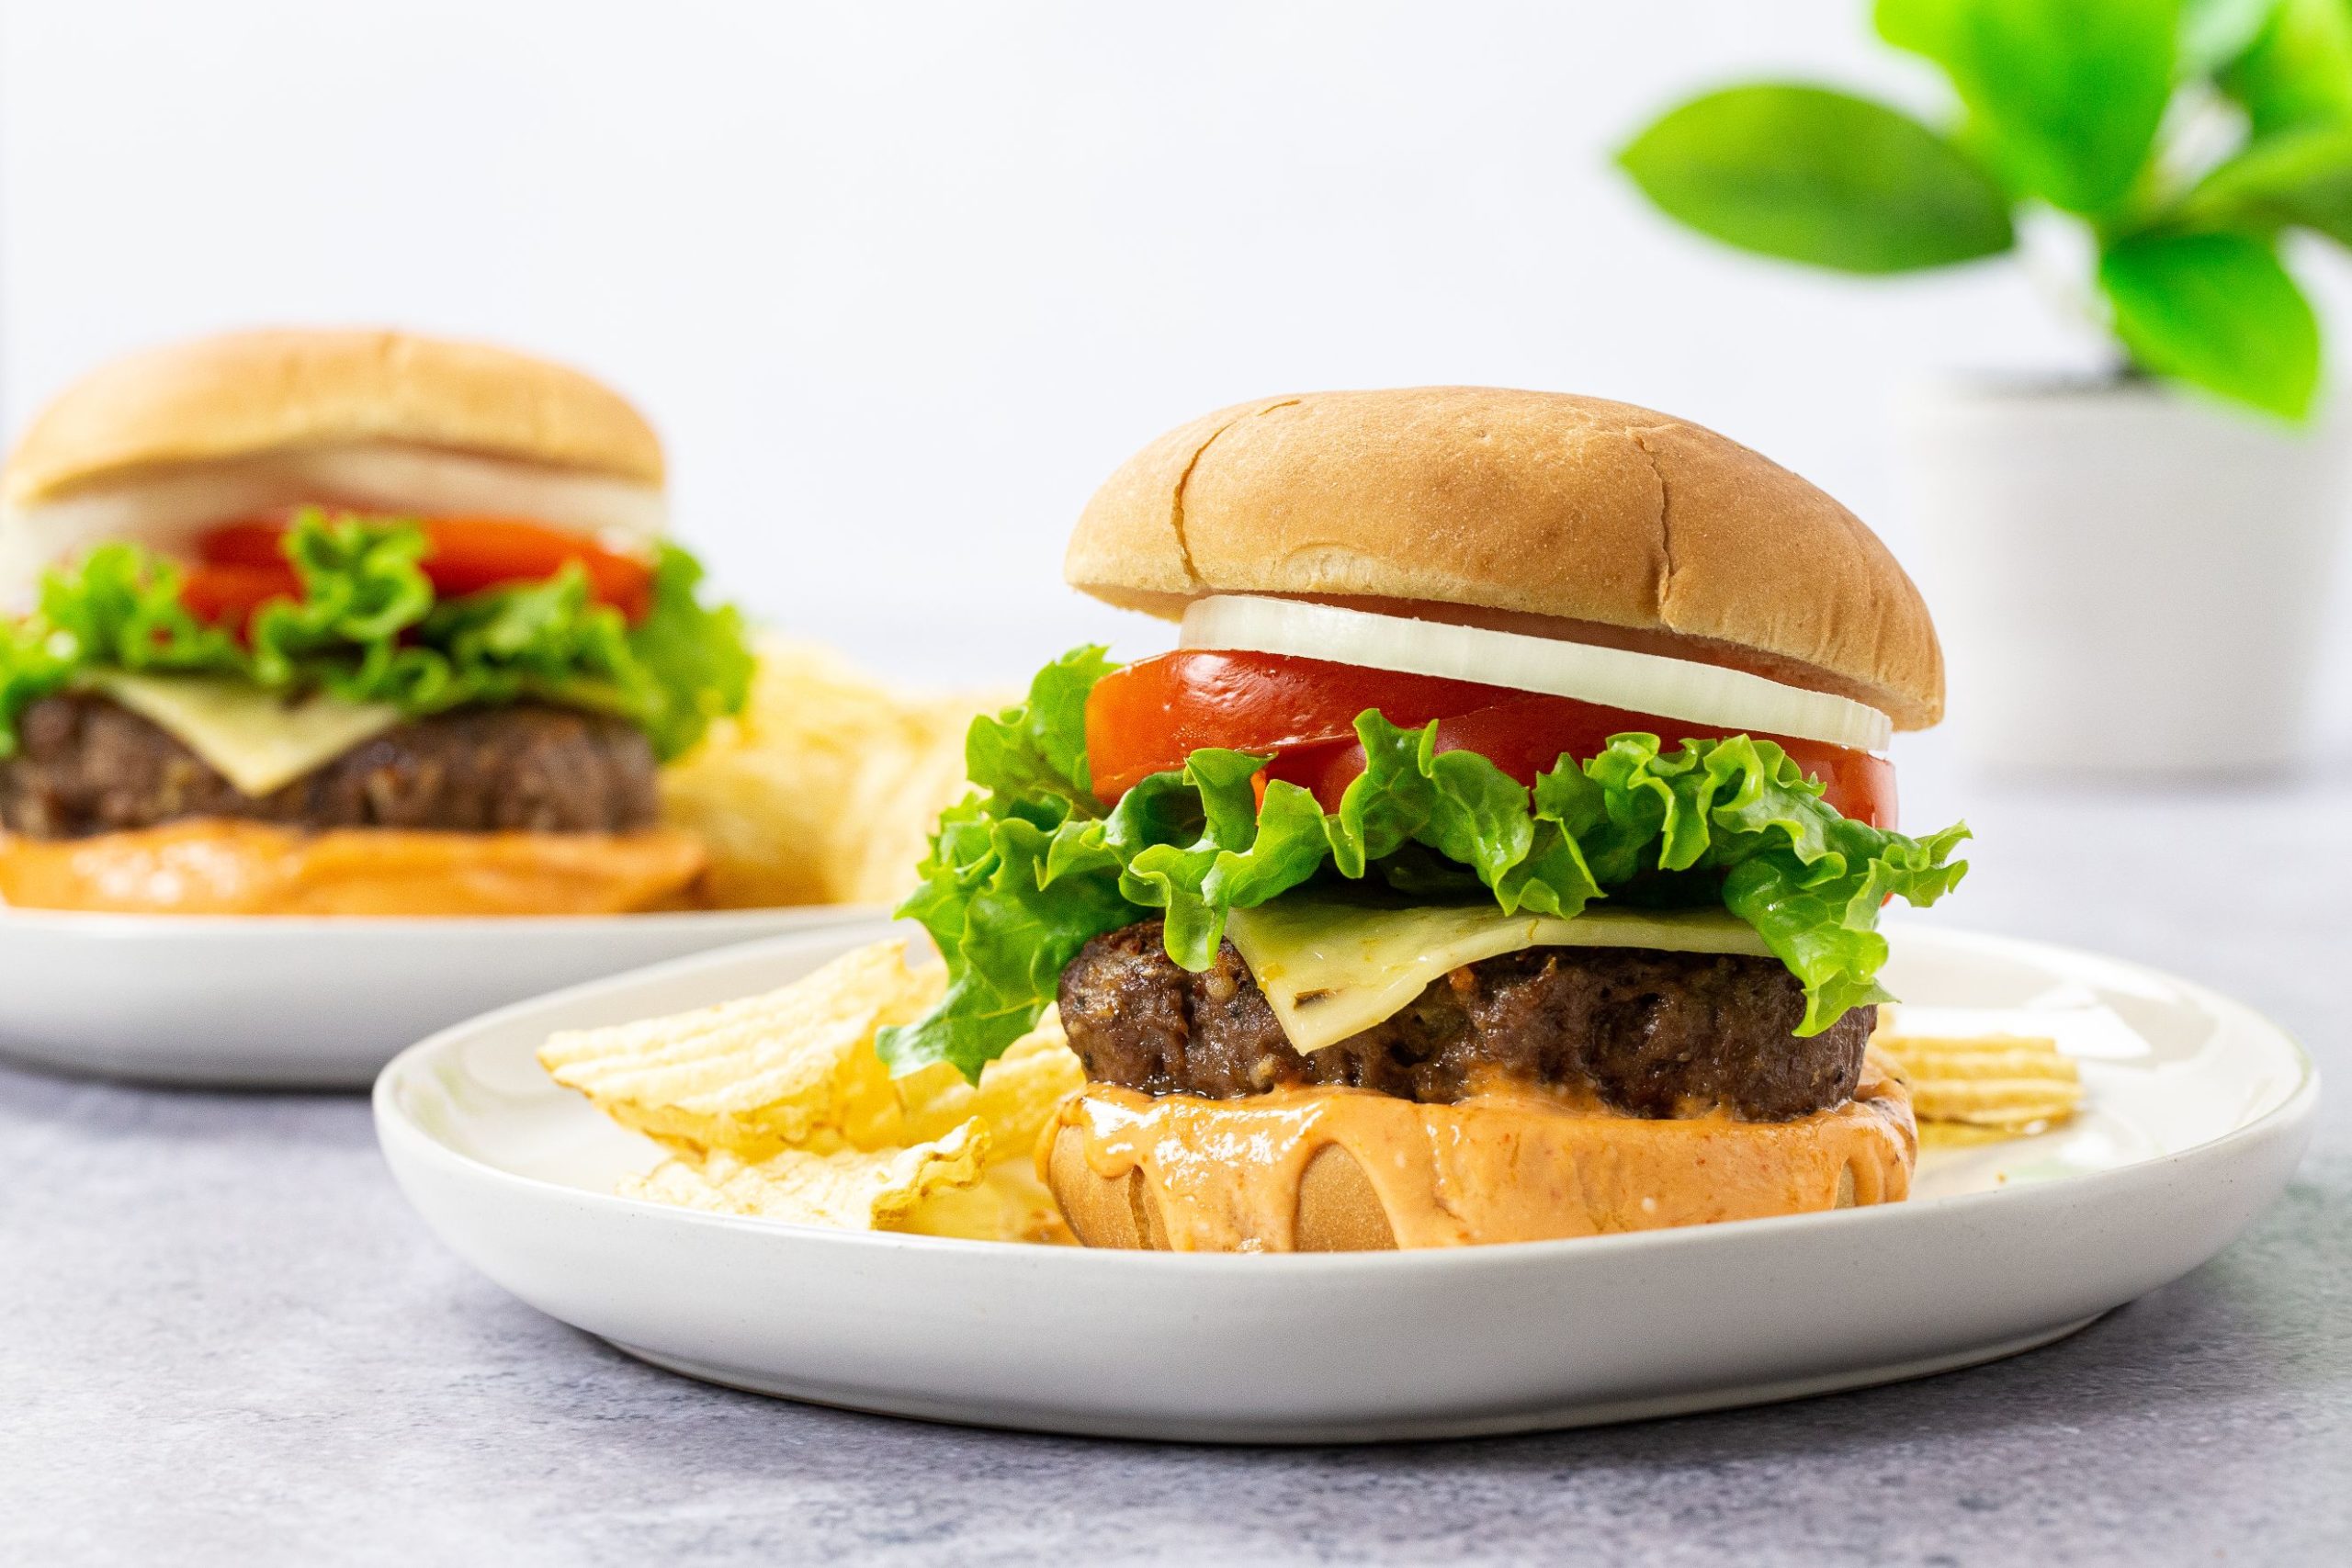 Two spicy burgers on white plates with cheese lettuce and tomatoes.